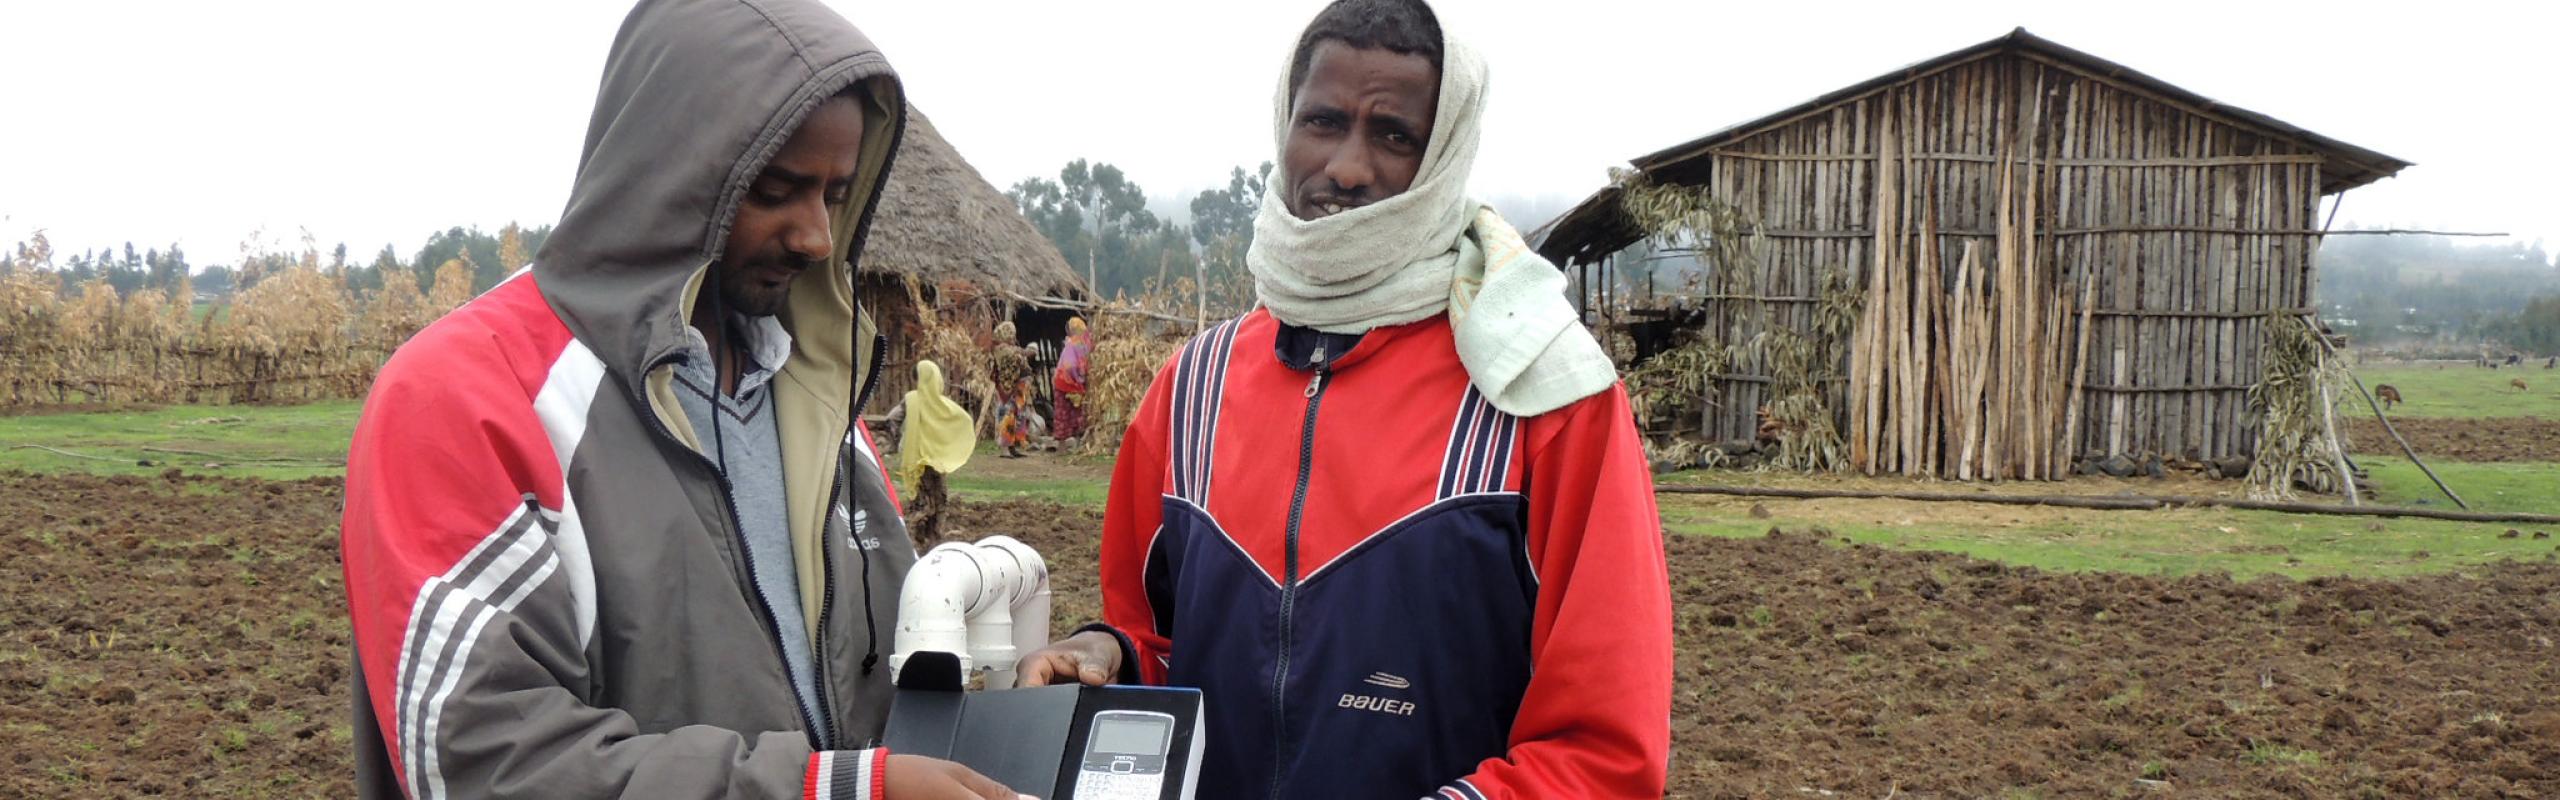 Two Ethiopian extension workers stand in a field and use a mobile phone to report farmers' feedback to scientists.